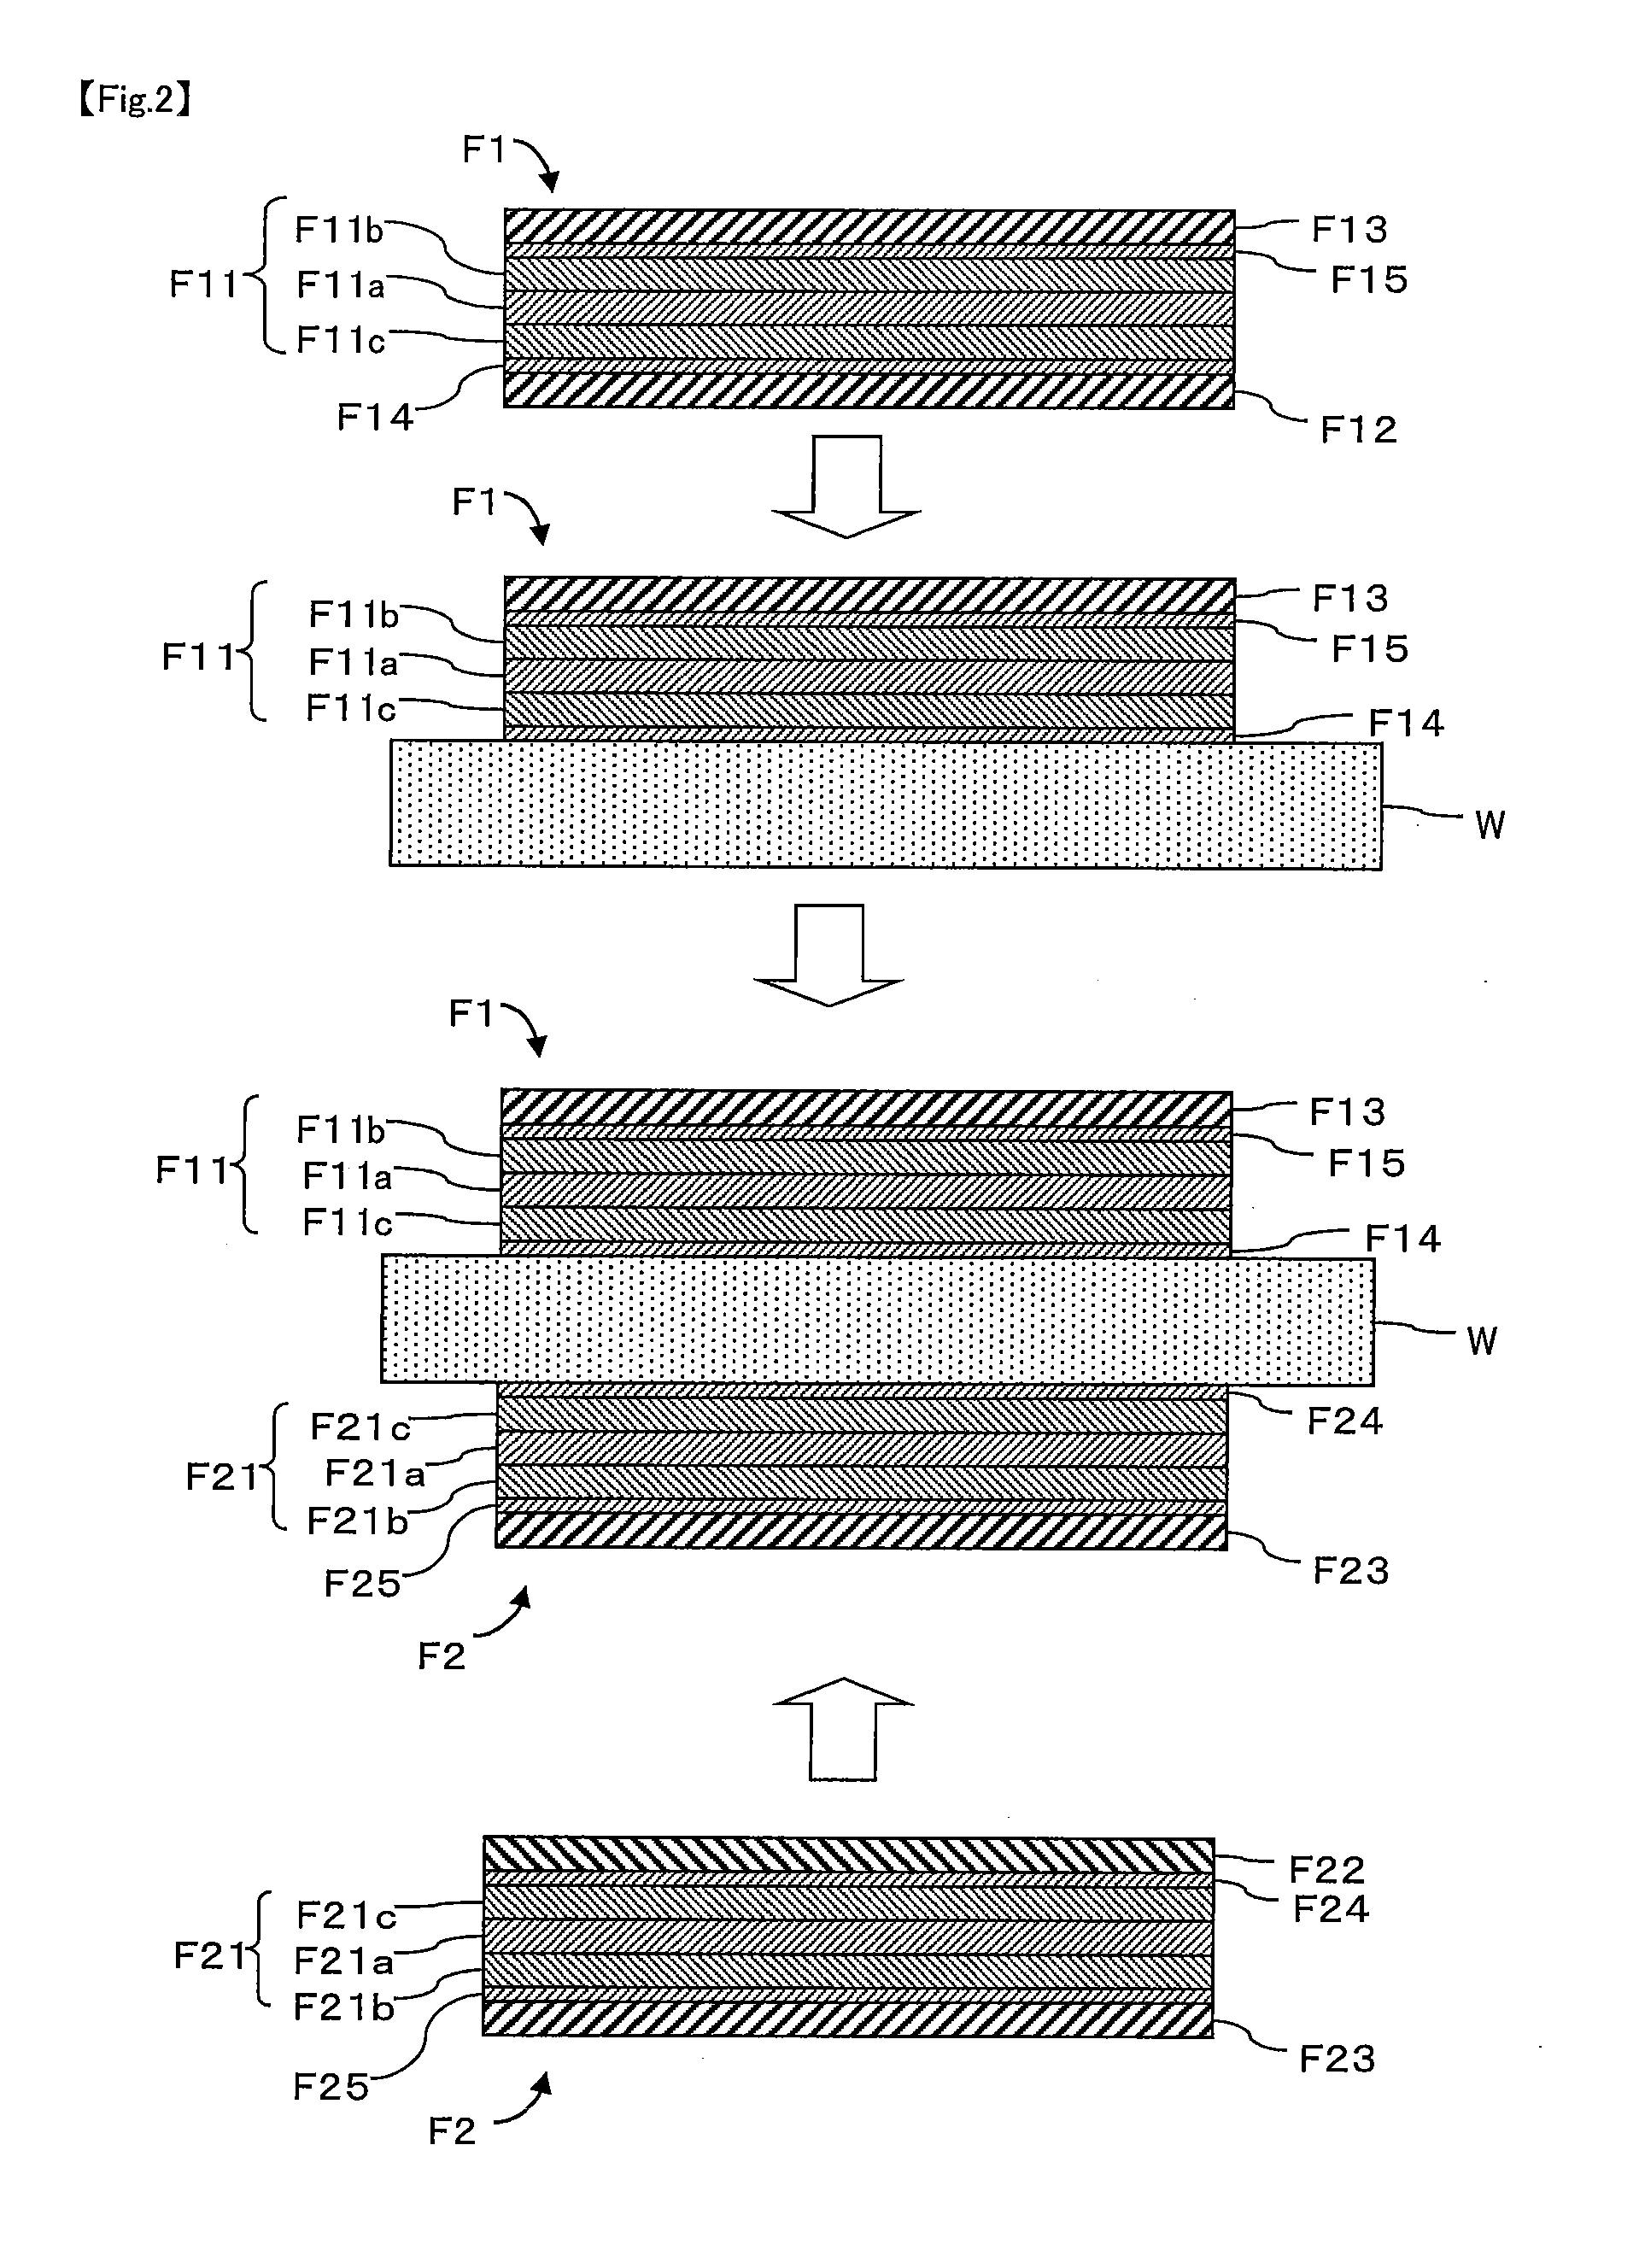 Optical display device manufacturing system and method for manufacturing optical display device